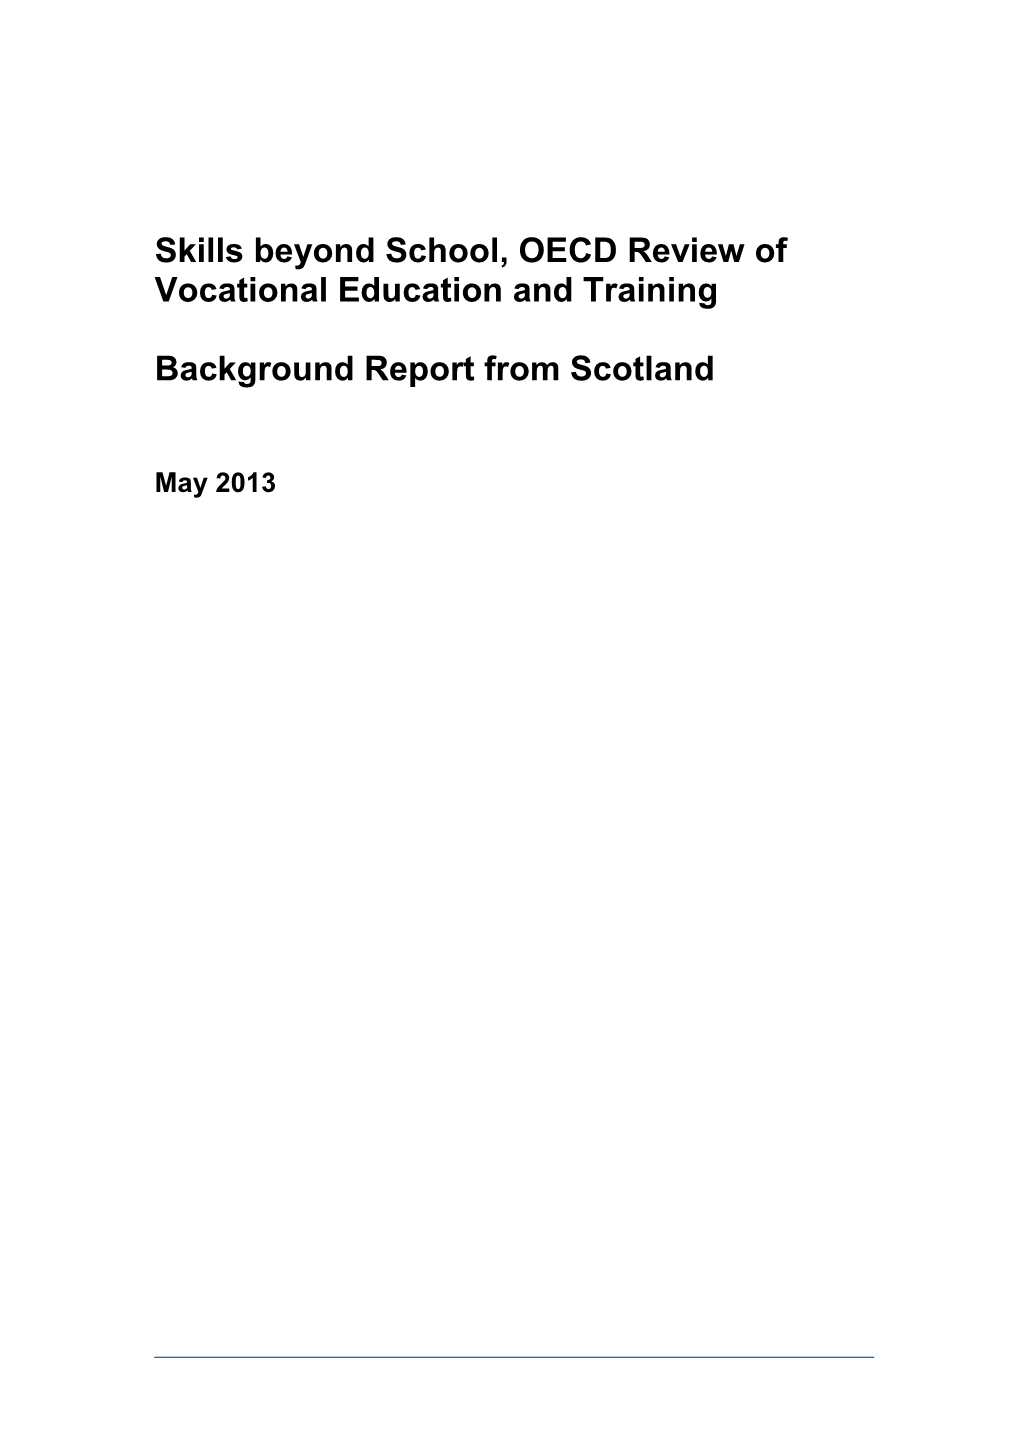 Skills Beyond School, OECD Review of Vocational Education and Training